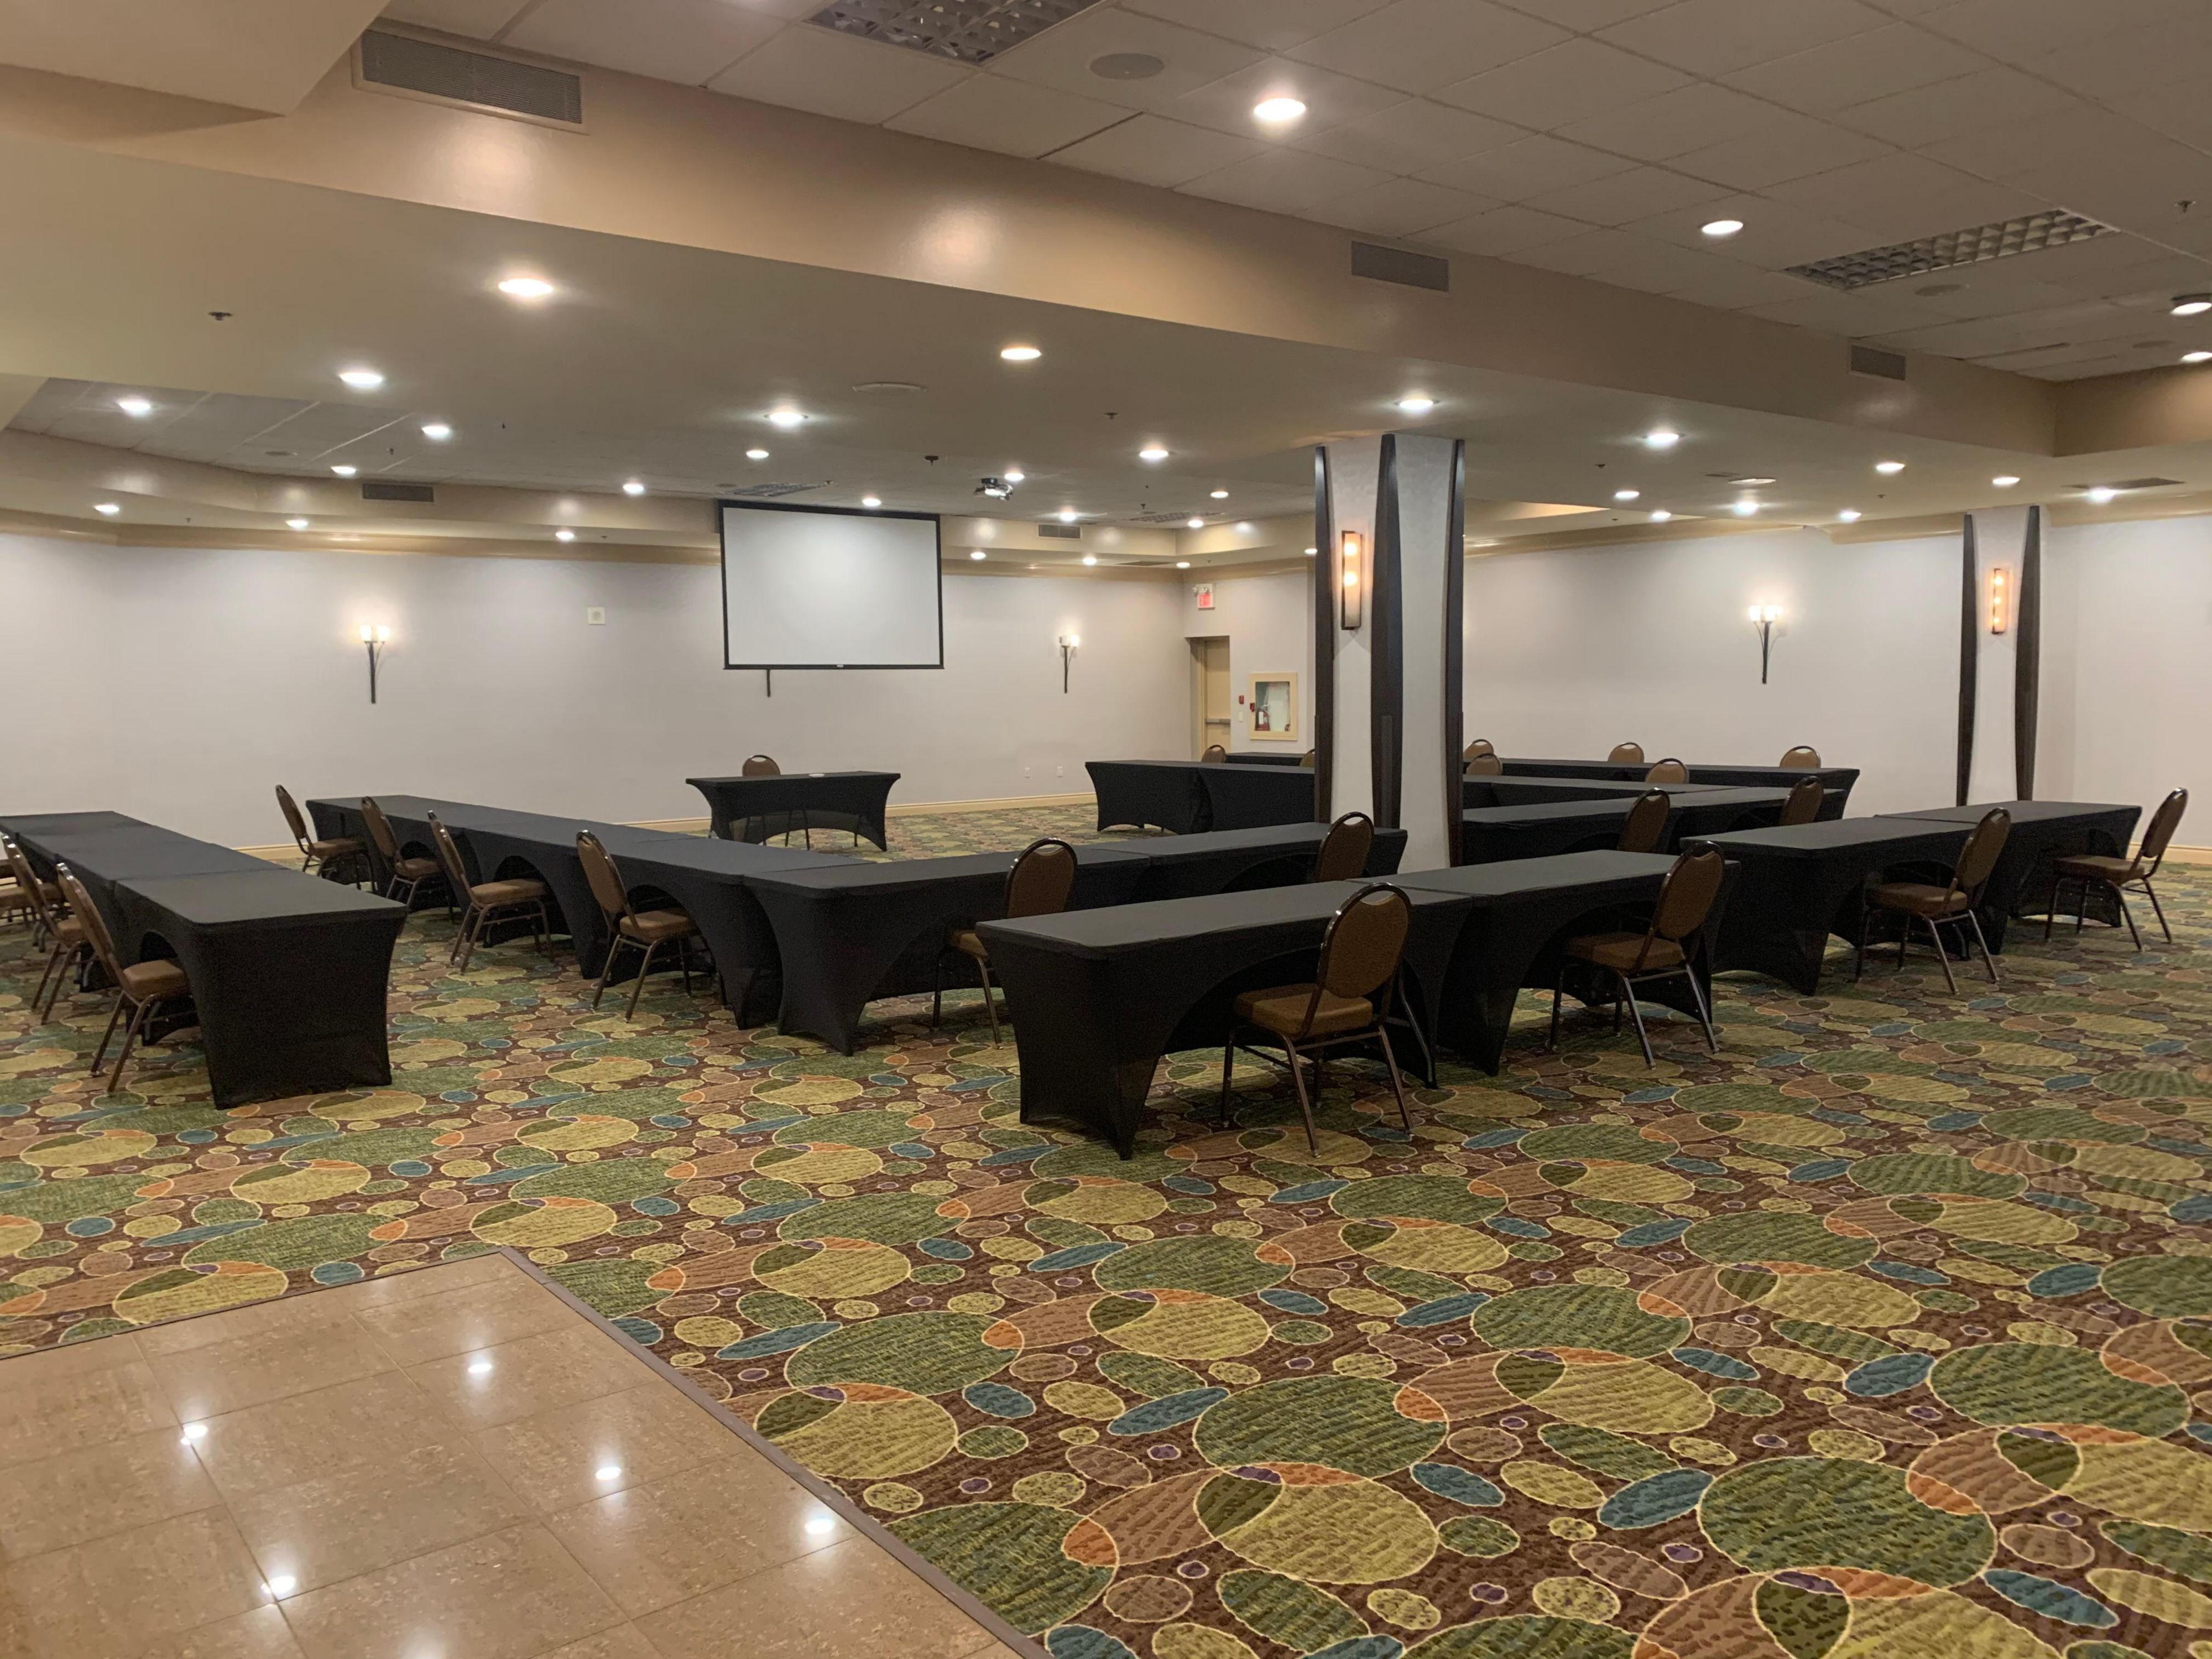 Meet with Confidence at The Holiday Inn & Suites Ambassador Bridge, as we offer ample options to host your meetings, while keeping the Health and Safety of your delegates top of mind.  Contact us for more details at 519-966-3274